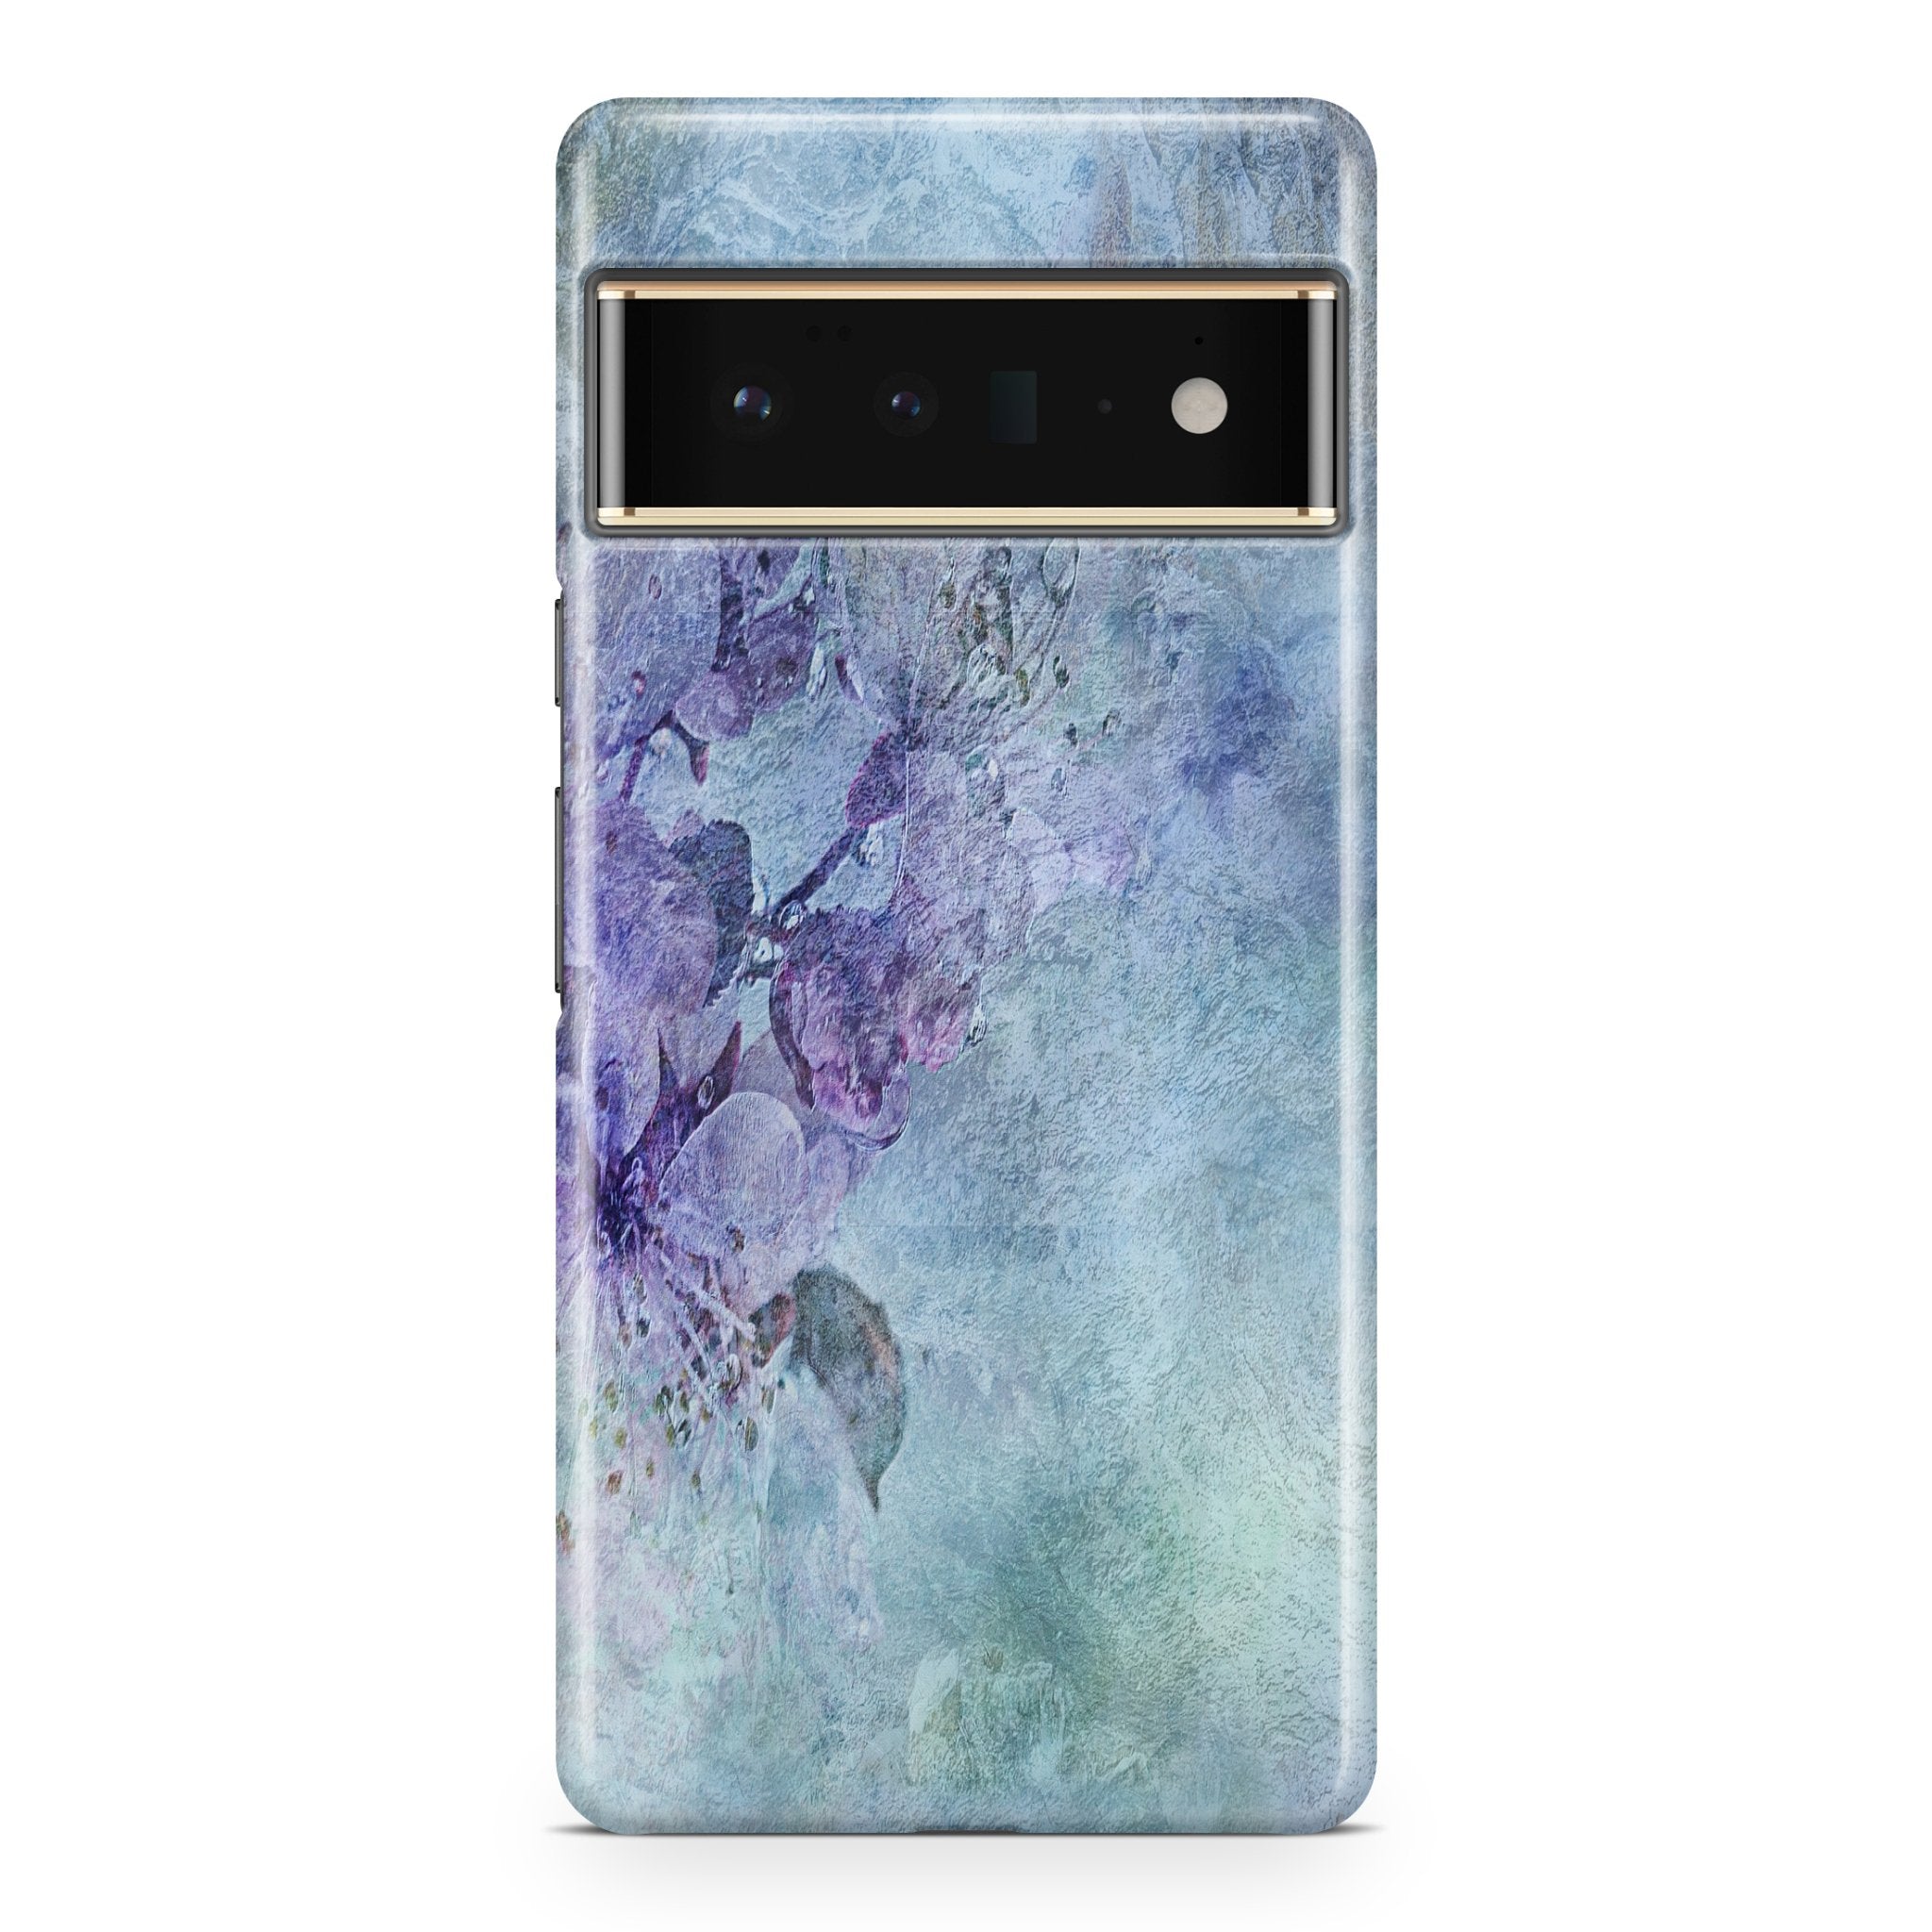 Spring Mist - Google phone case designs by CaseSwagger